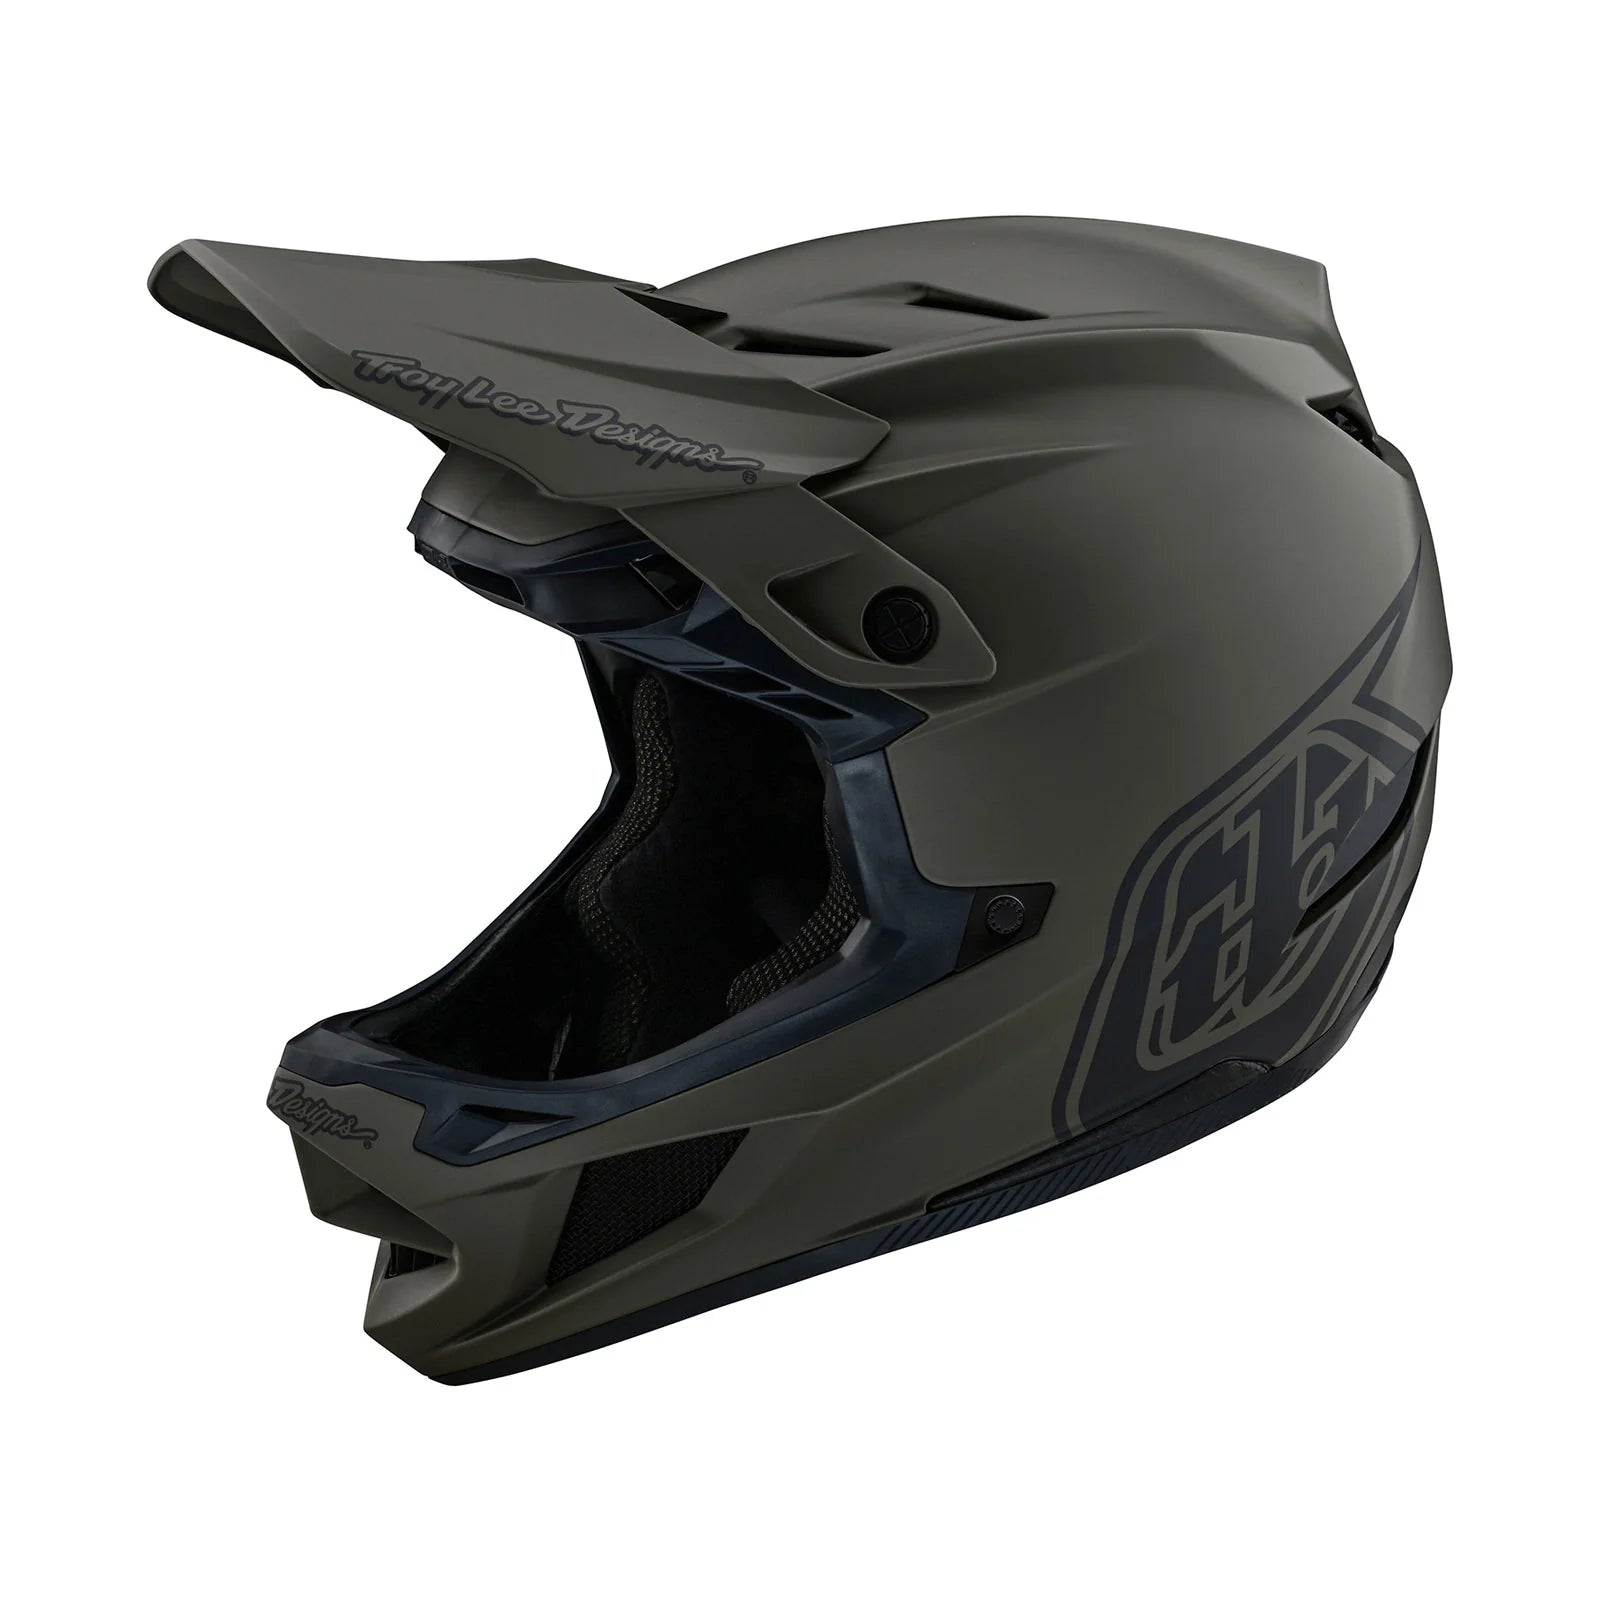 A TLD D4 AS Composite Helmet W/MIPS Stealth Tarmac with a black and grey design, featuring a front air intake system.